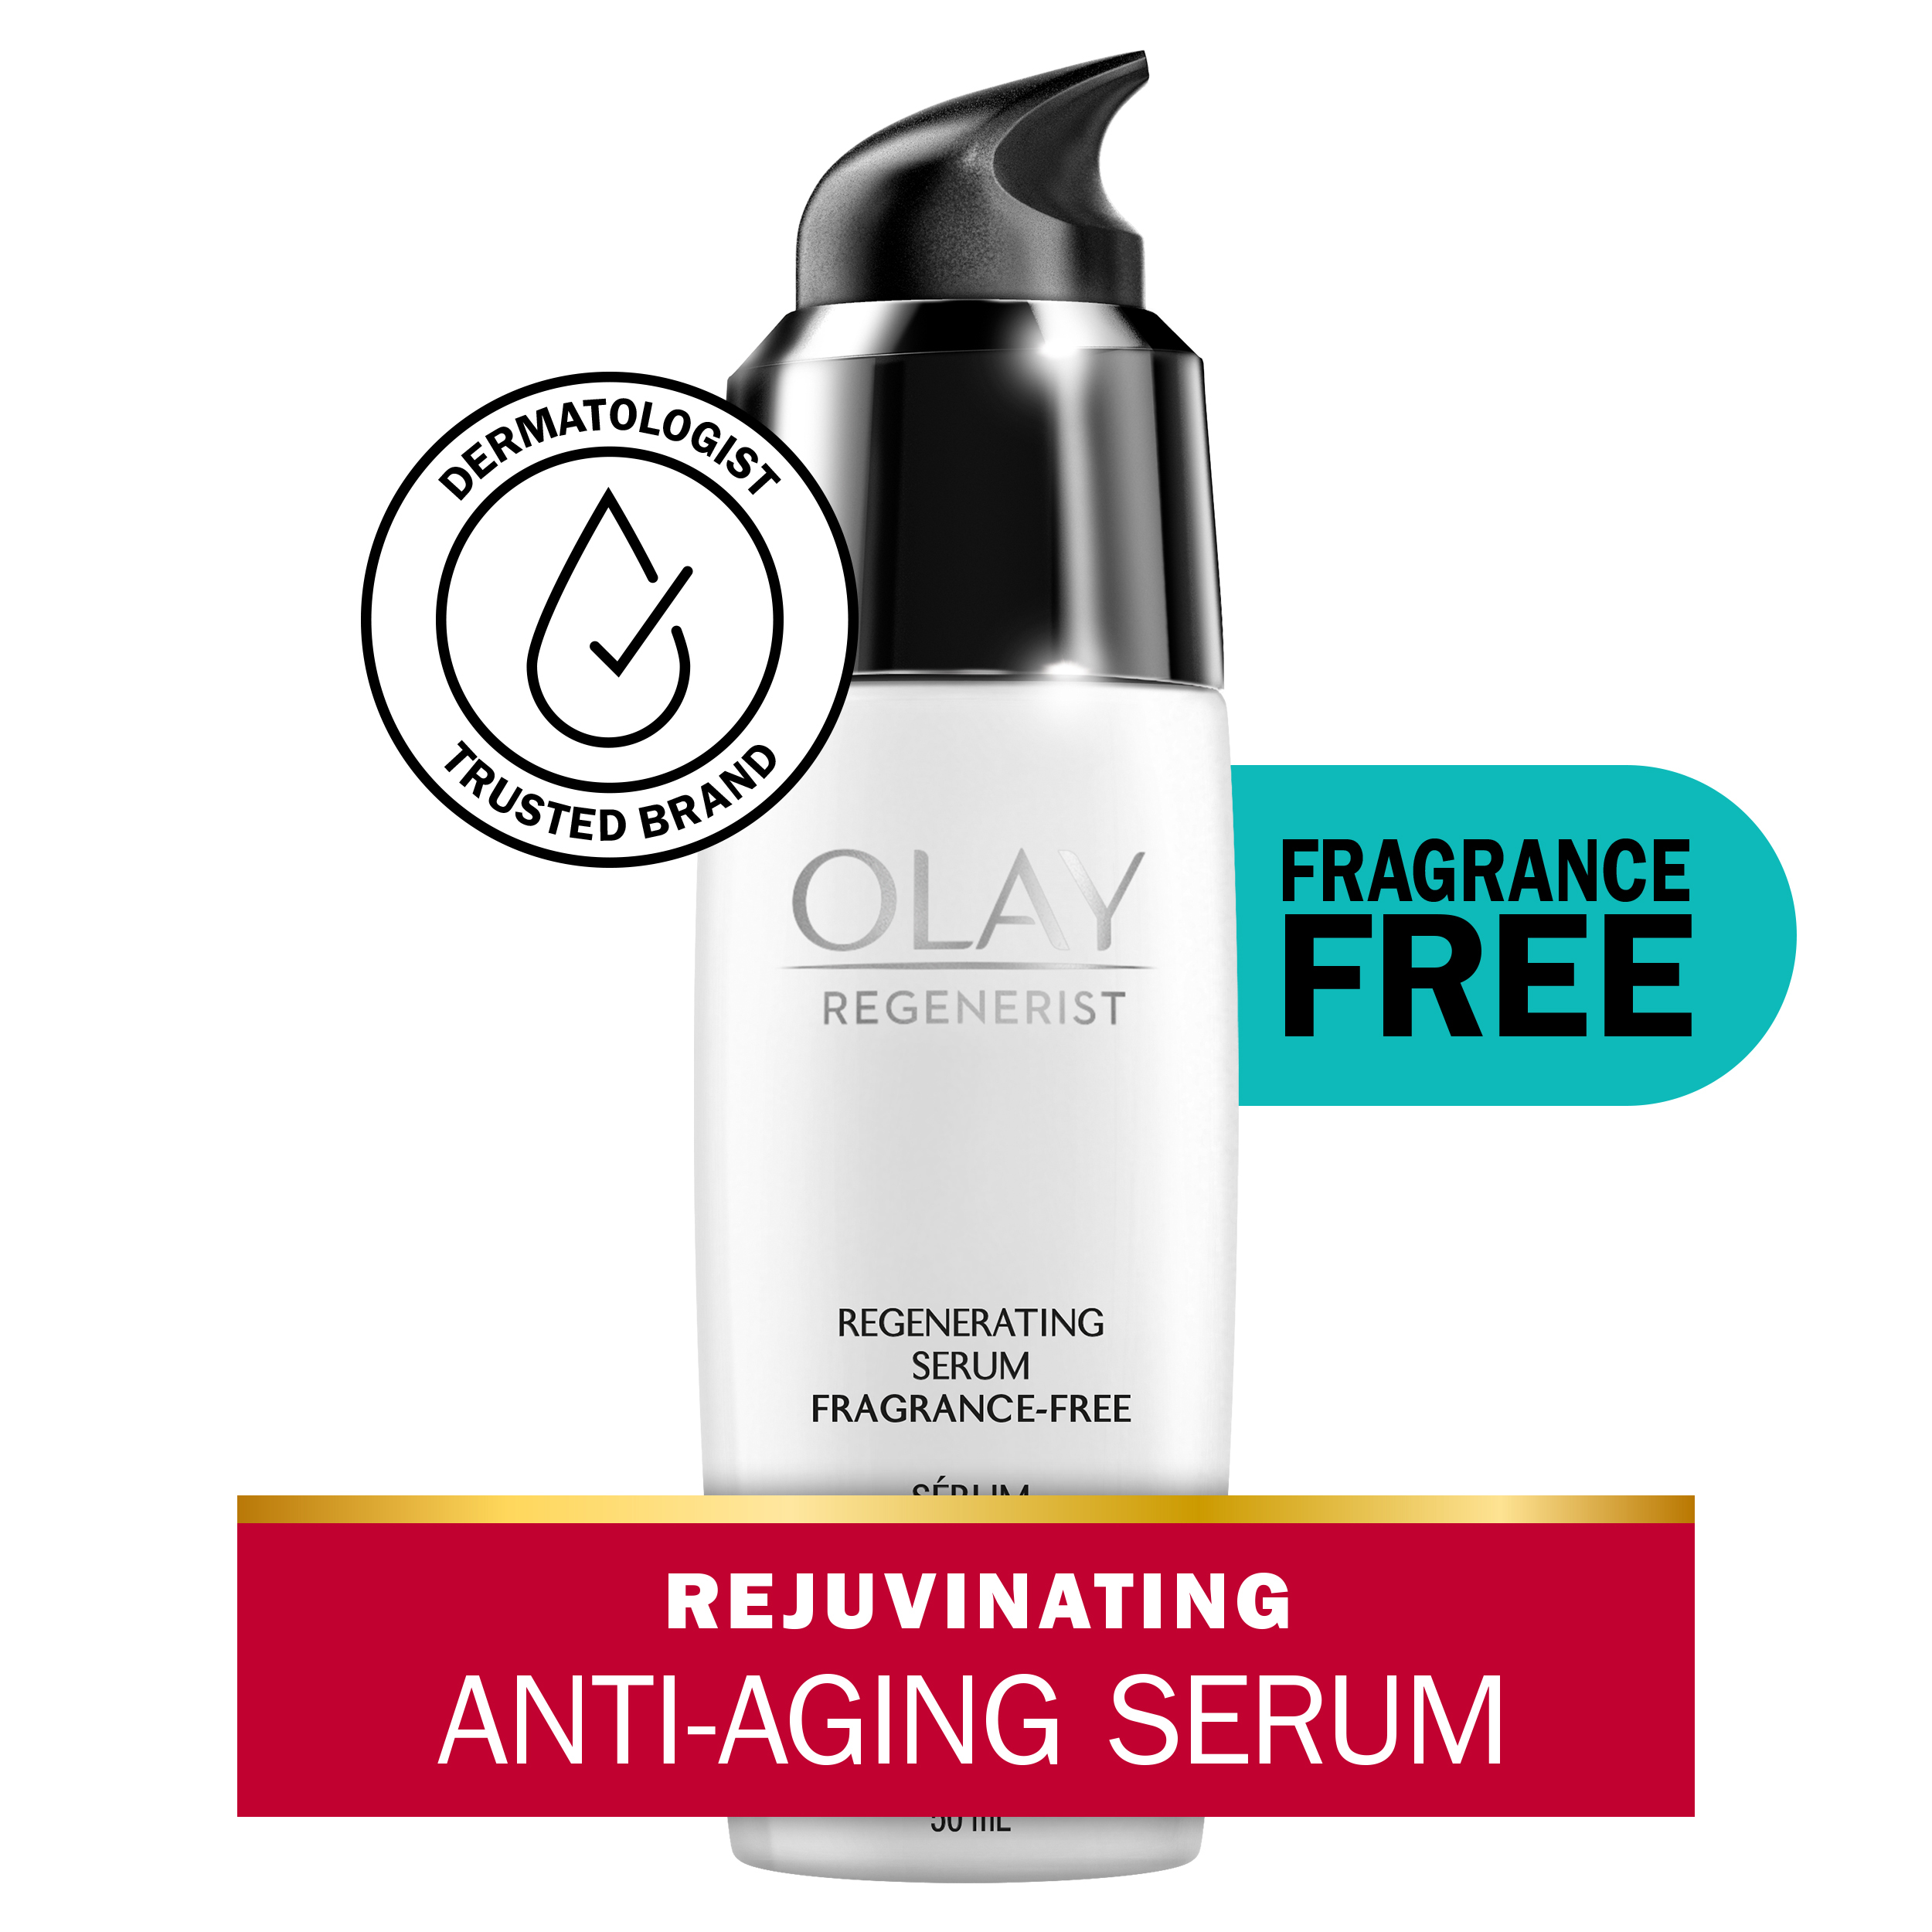 Olay Age Defying Anti-Wrinkle 2-in-1 Day Cream Plus Face Serum, All Skin Types,1.7 oz - image 1 of 9